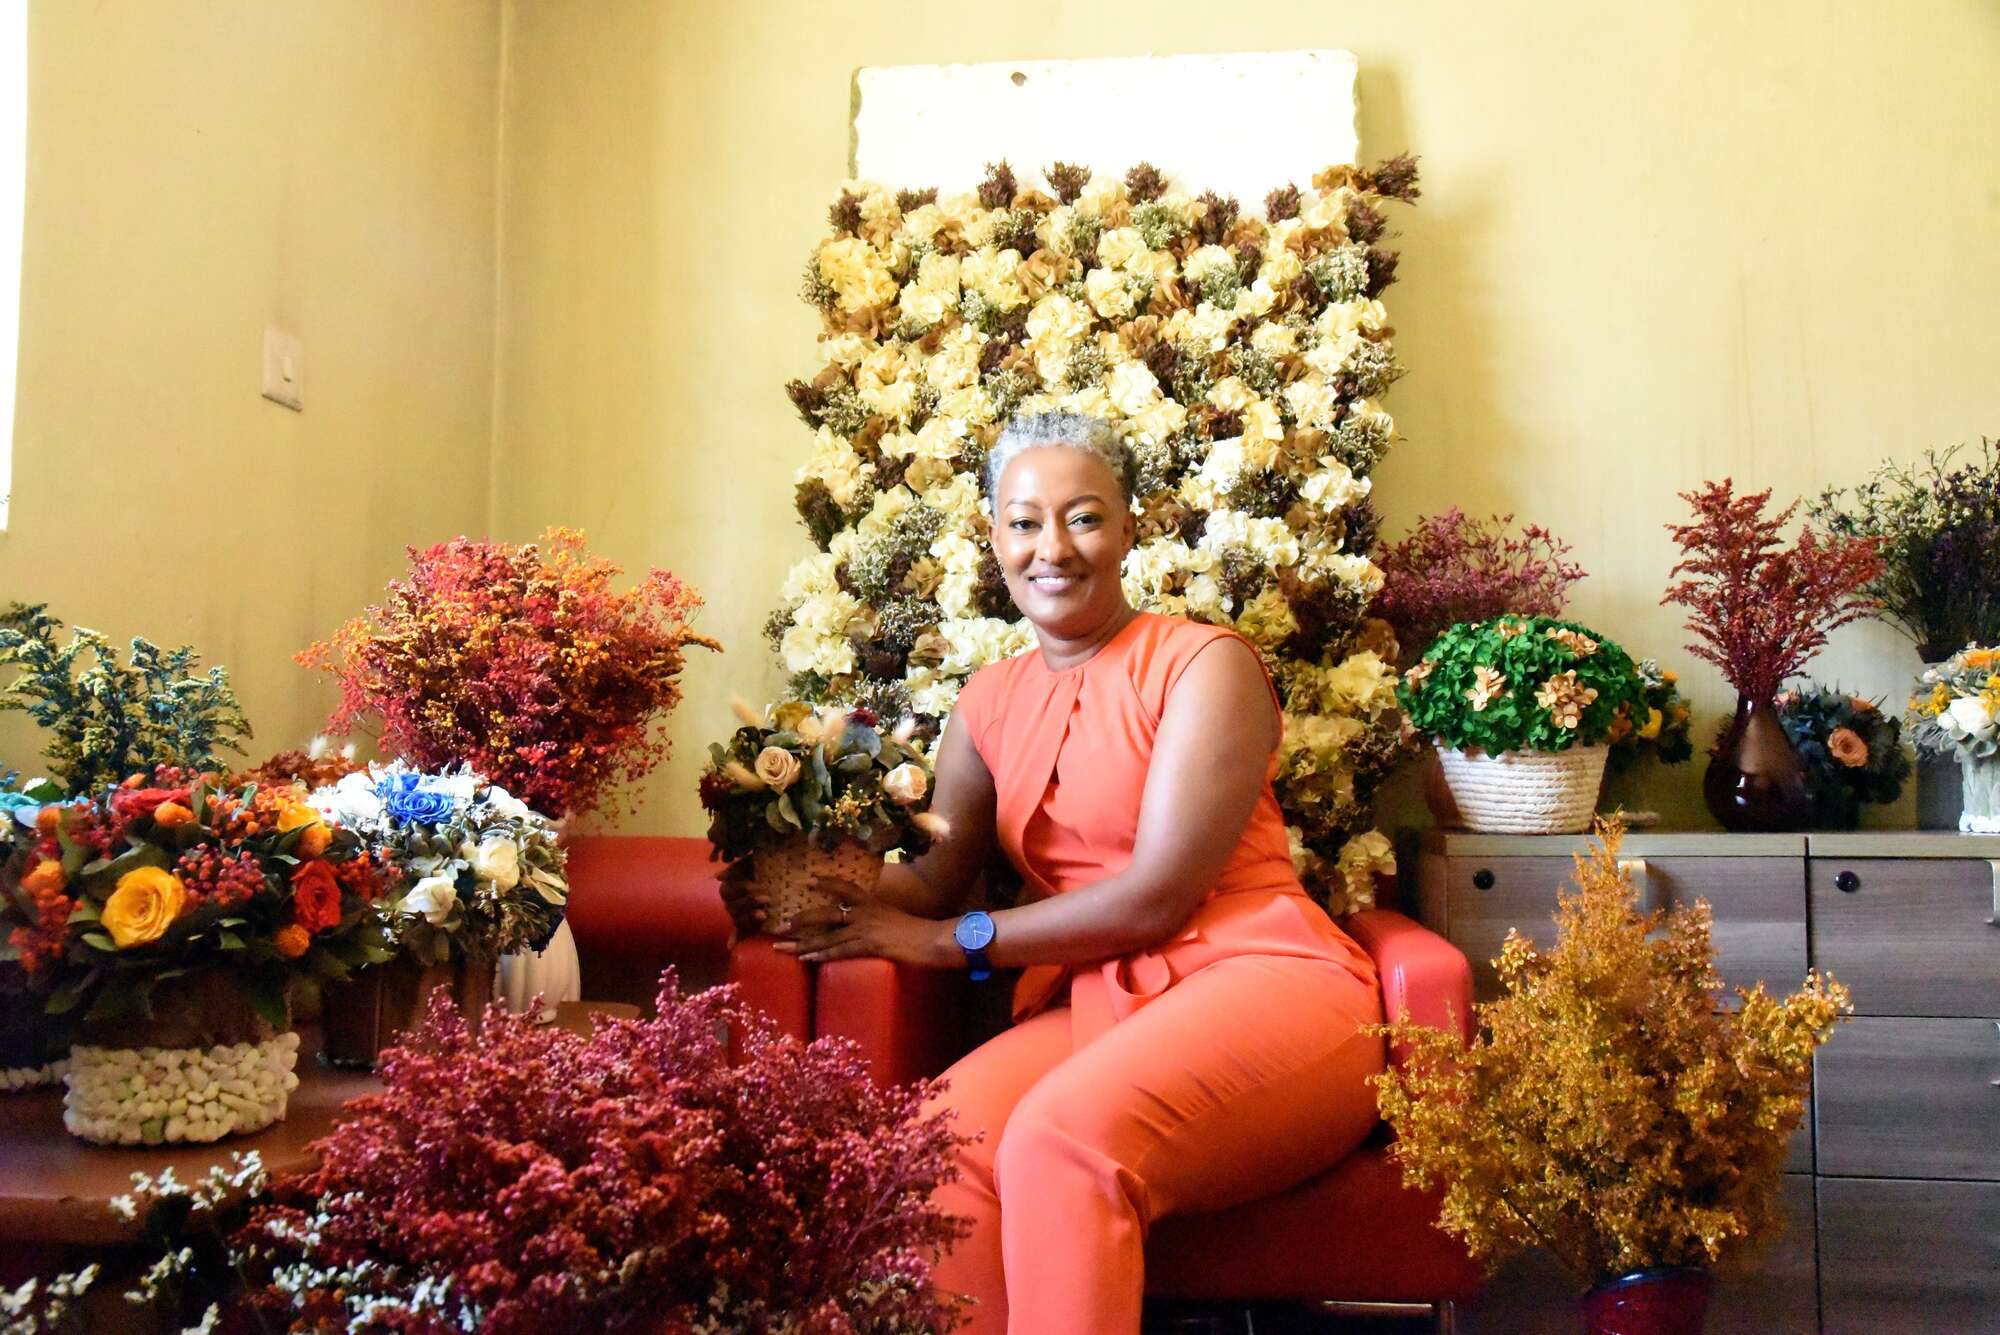 Kendi finds her life calling preserving beauty of blooms up to 2 years